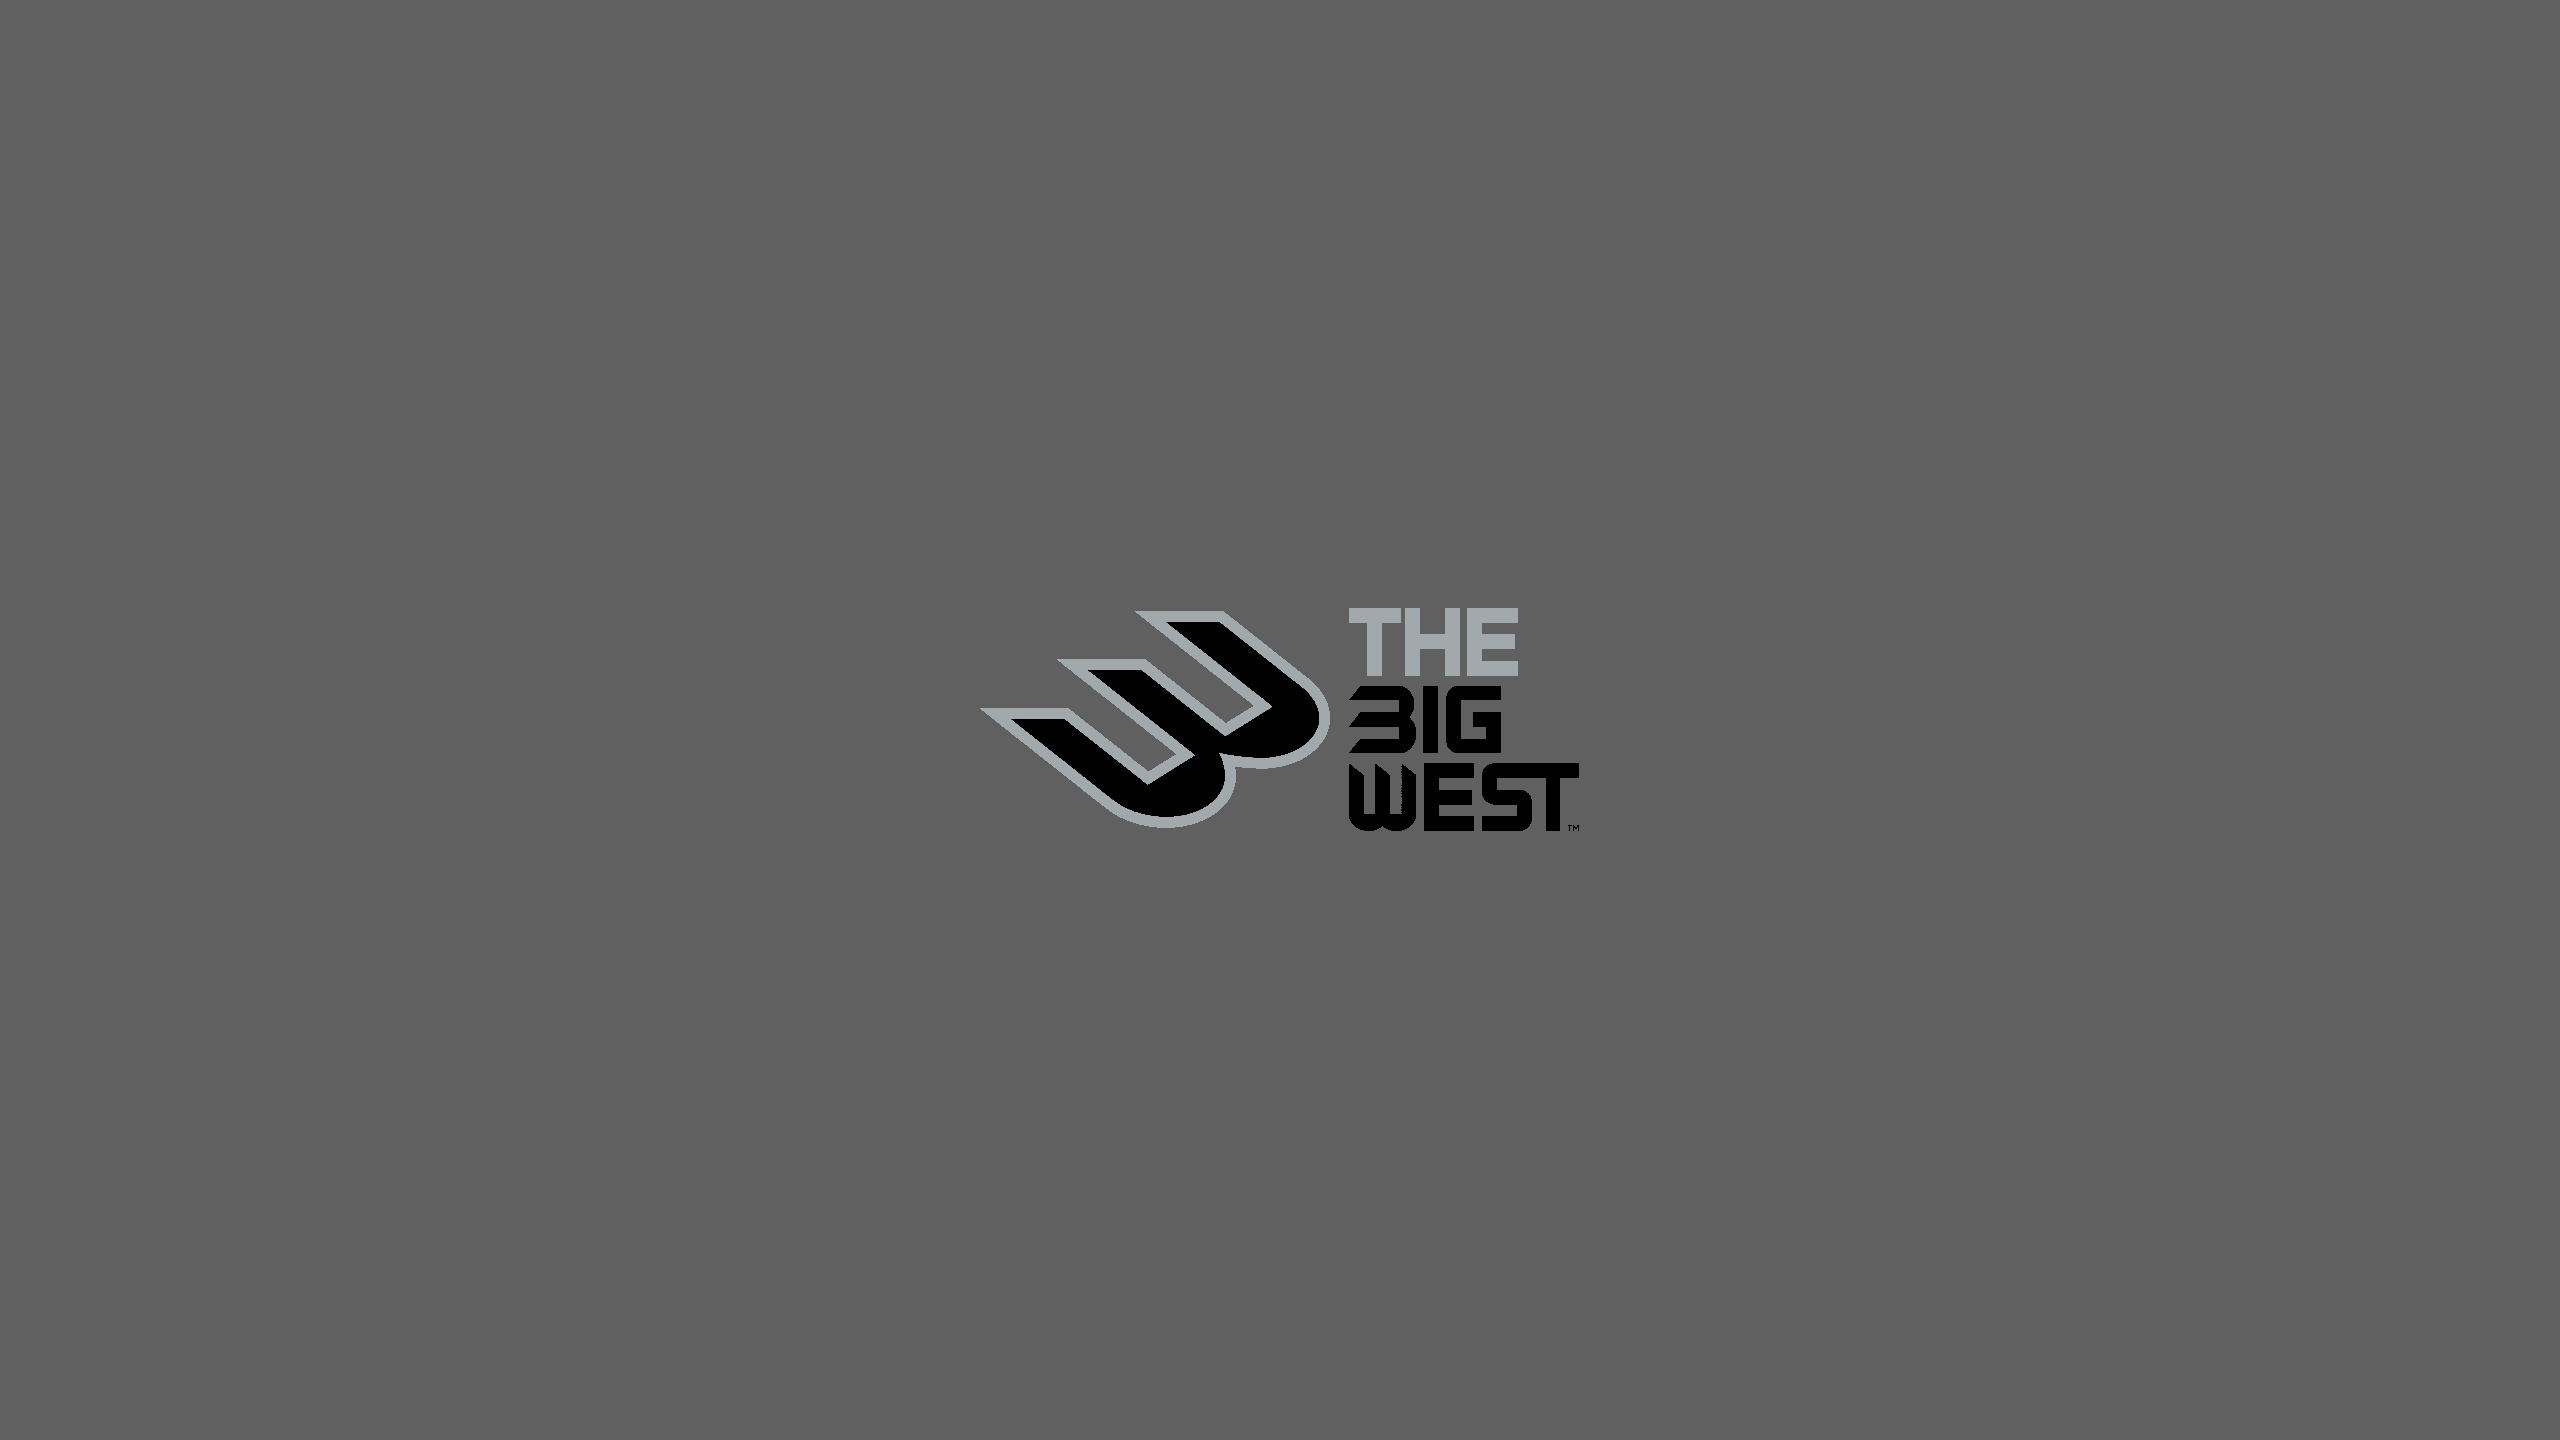 Big West Conference Basketball - NCAAB - Square Bettor